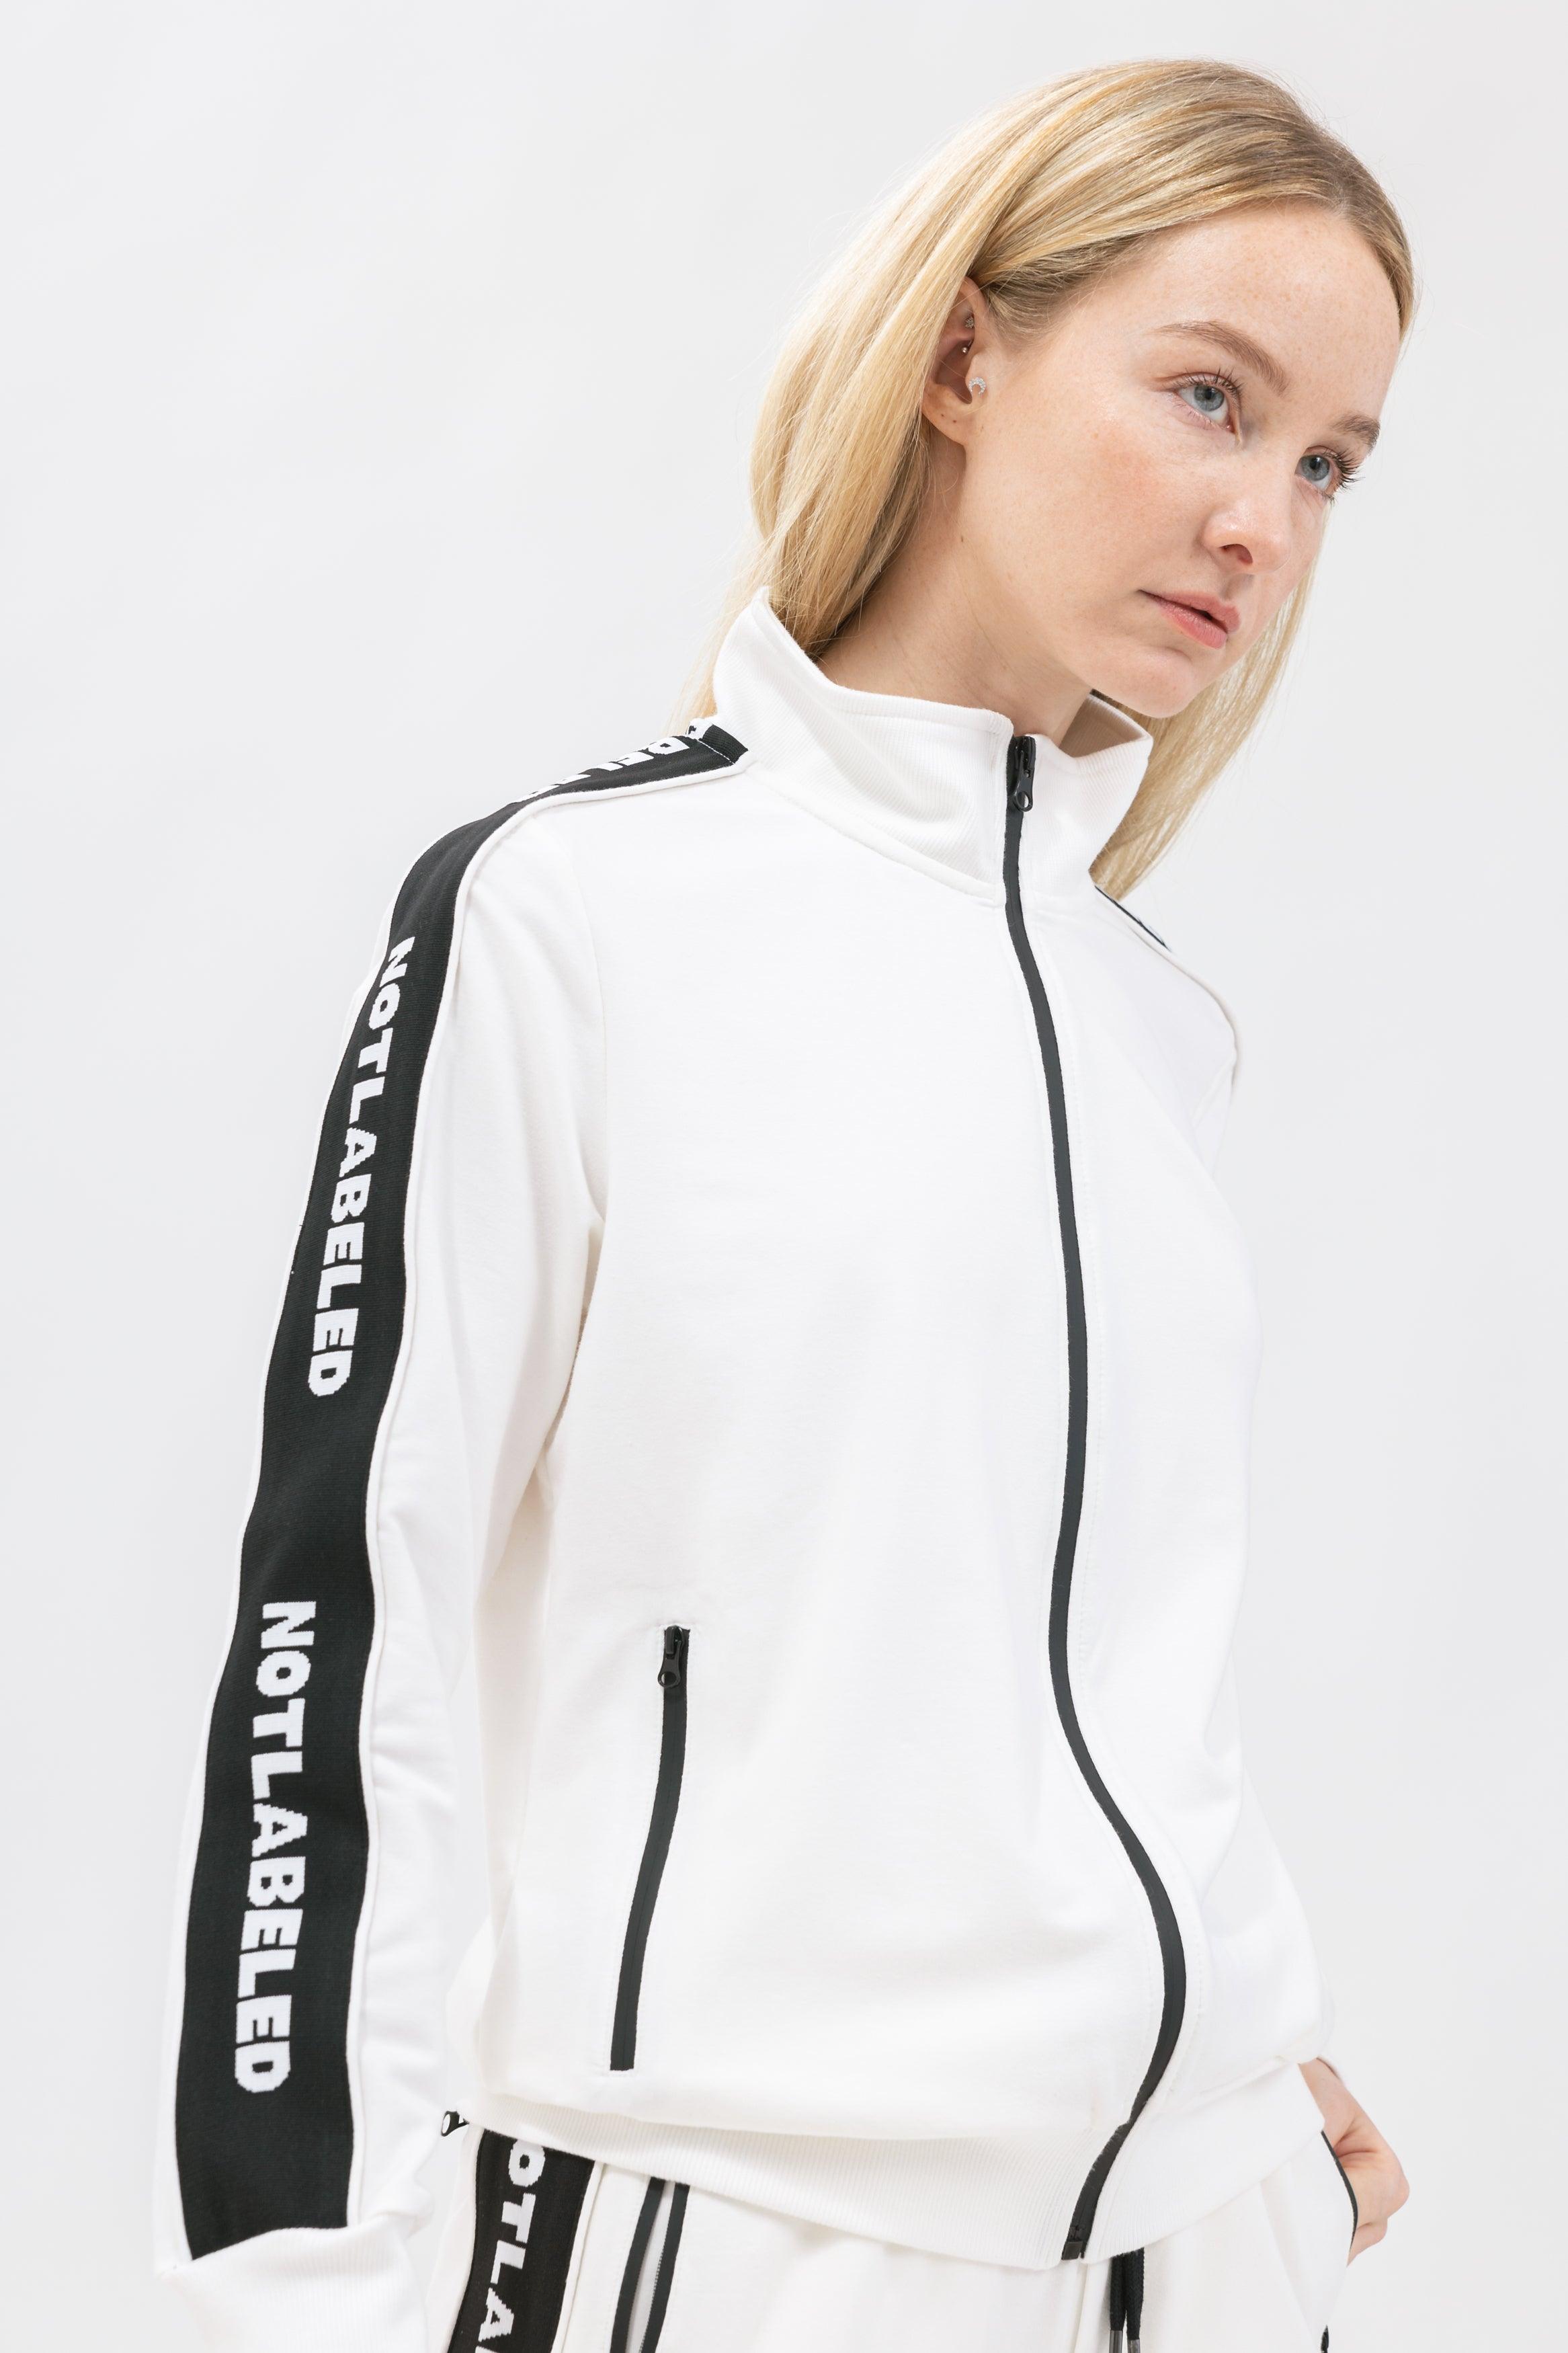 ATHLEISURE – NotLabeled